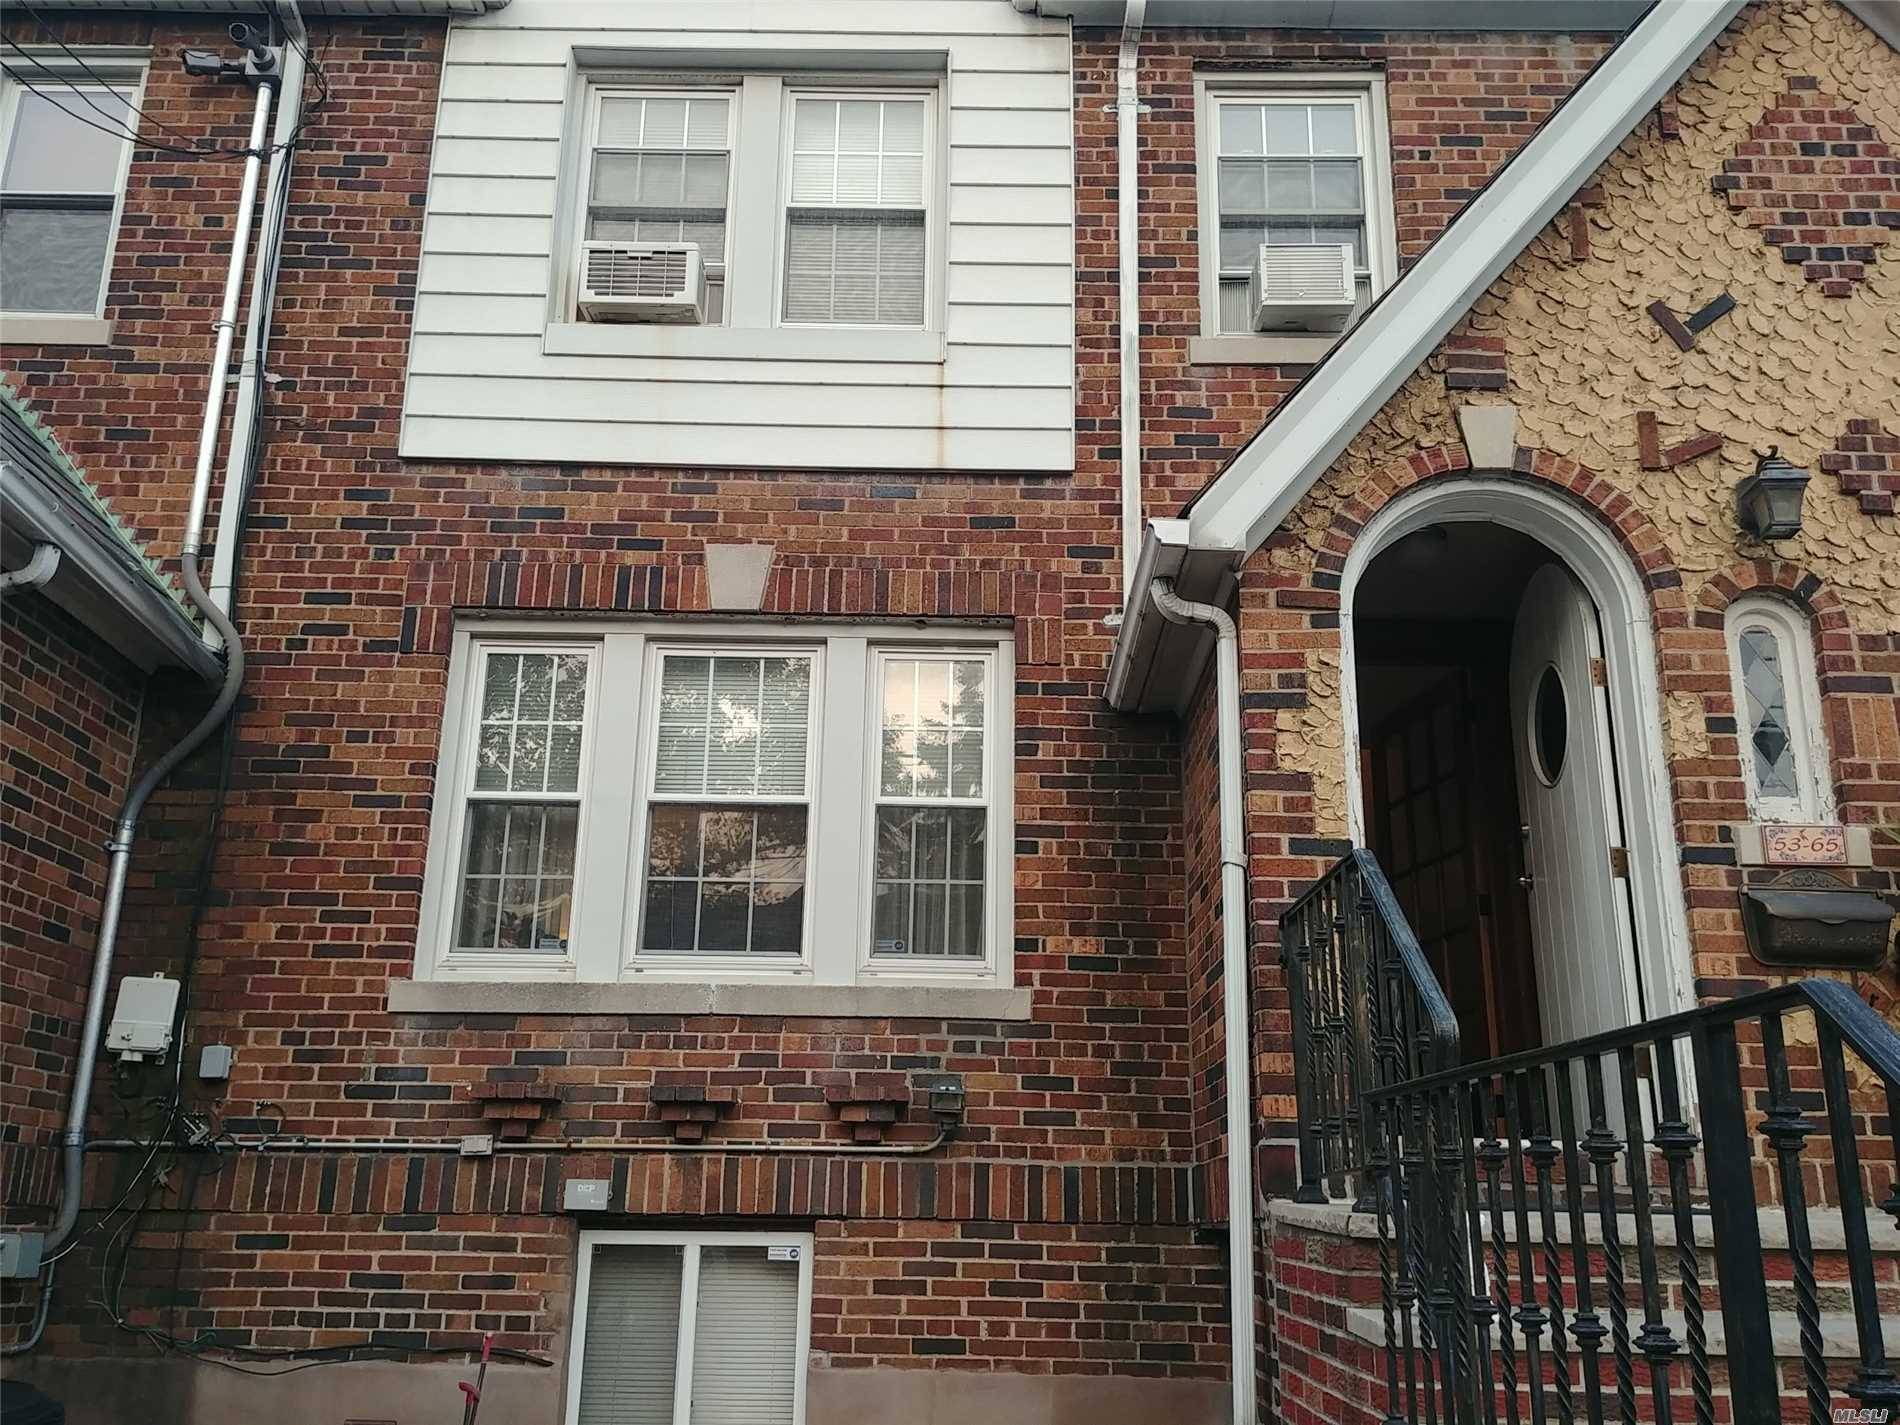 Gorgeous 2 Family House, 1st Floor 1 Bed 1 Bath, 2nd 3rd Is A Duplex, Living Room, Dining Room, Separate Eat In Kitchen, 3 Bedrooms, 1 1 2 Baths, Hardwood ...